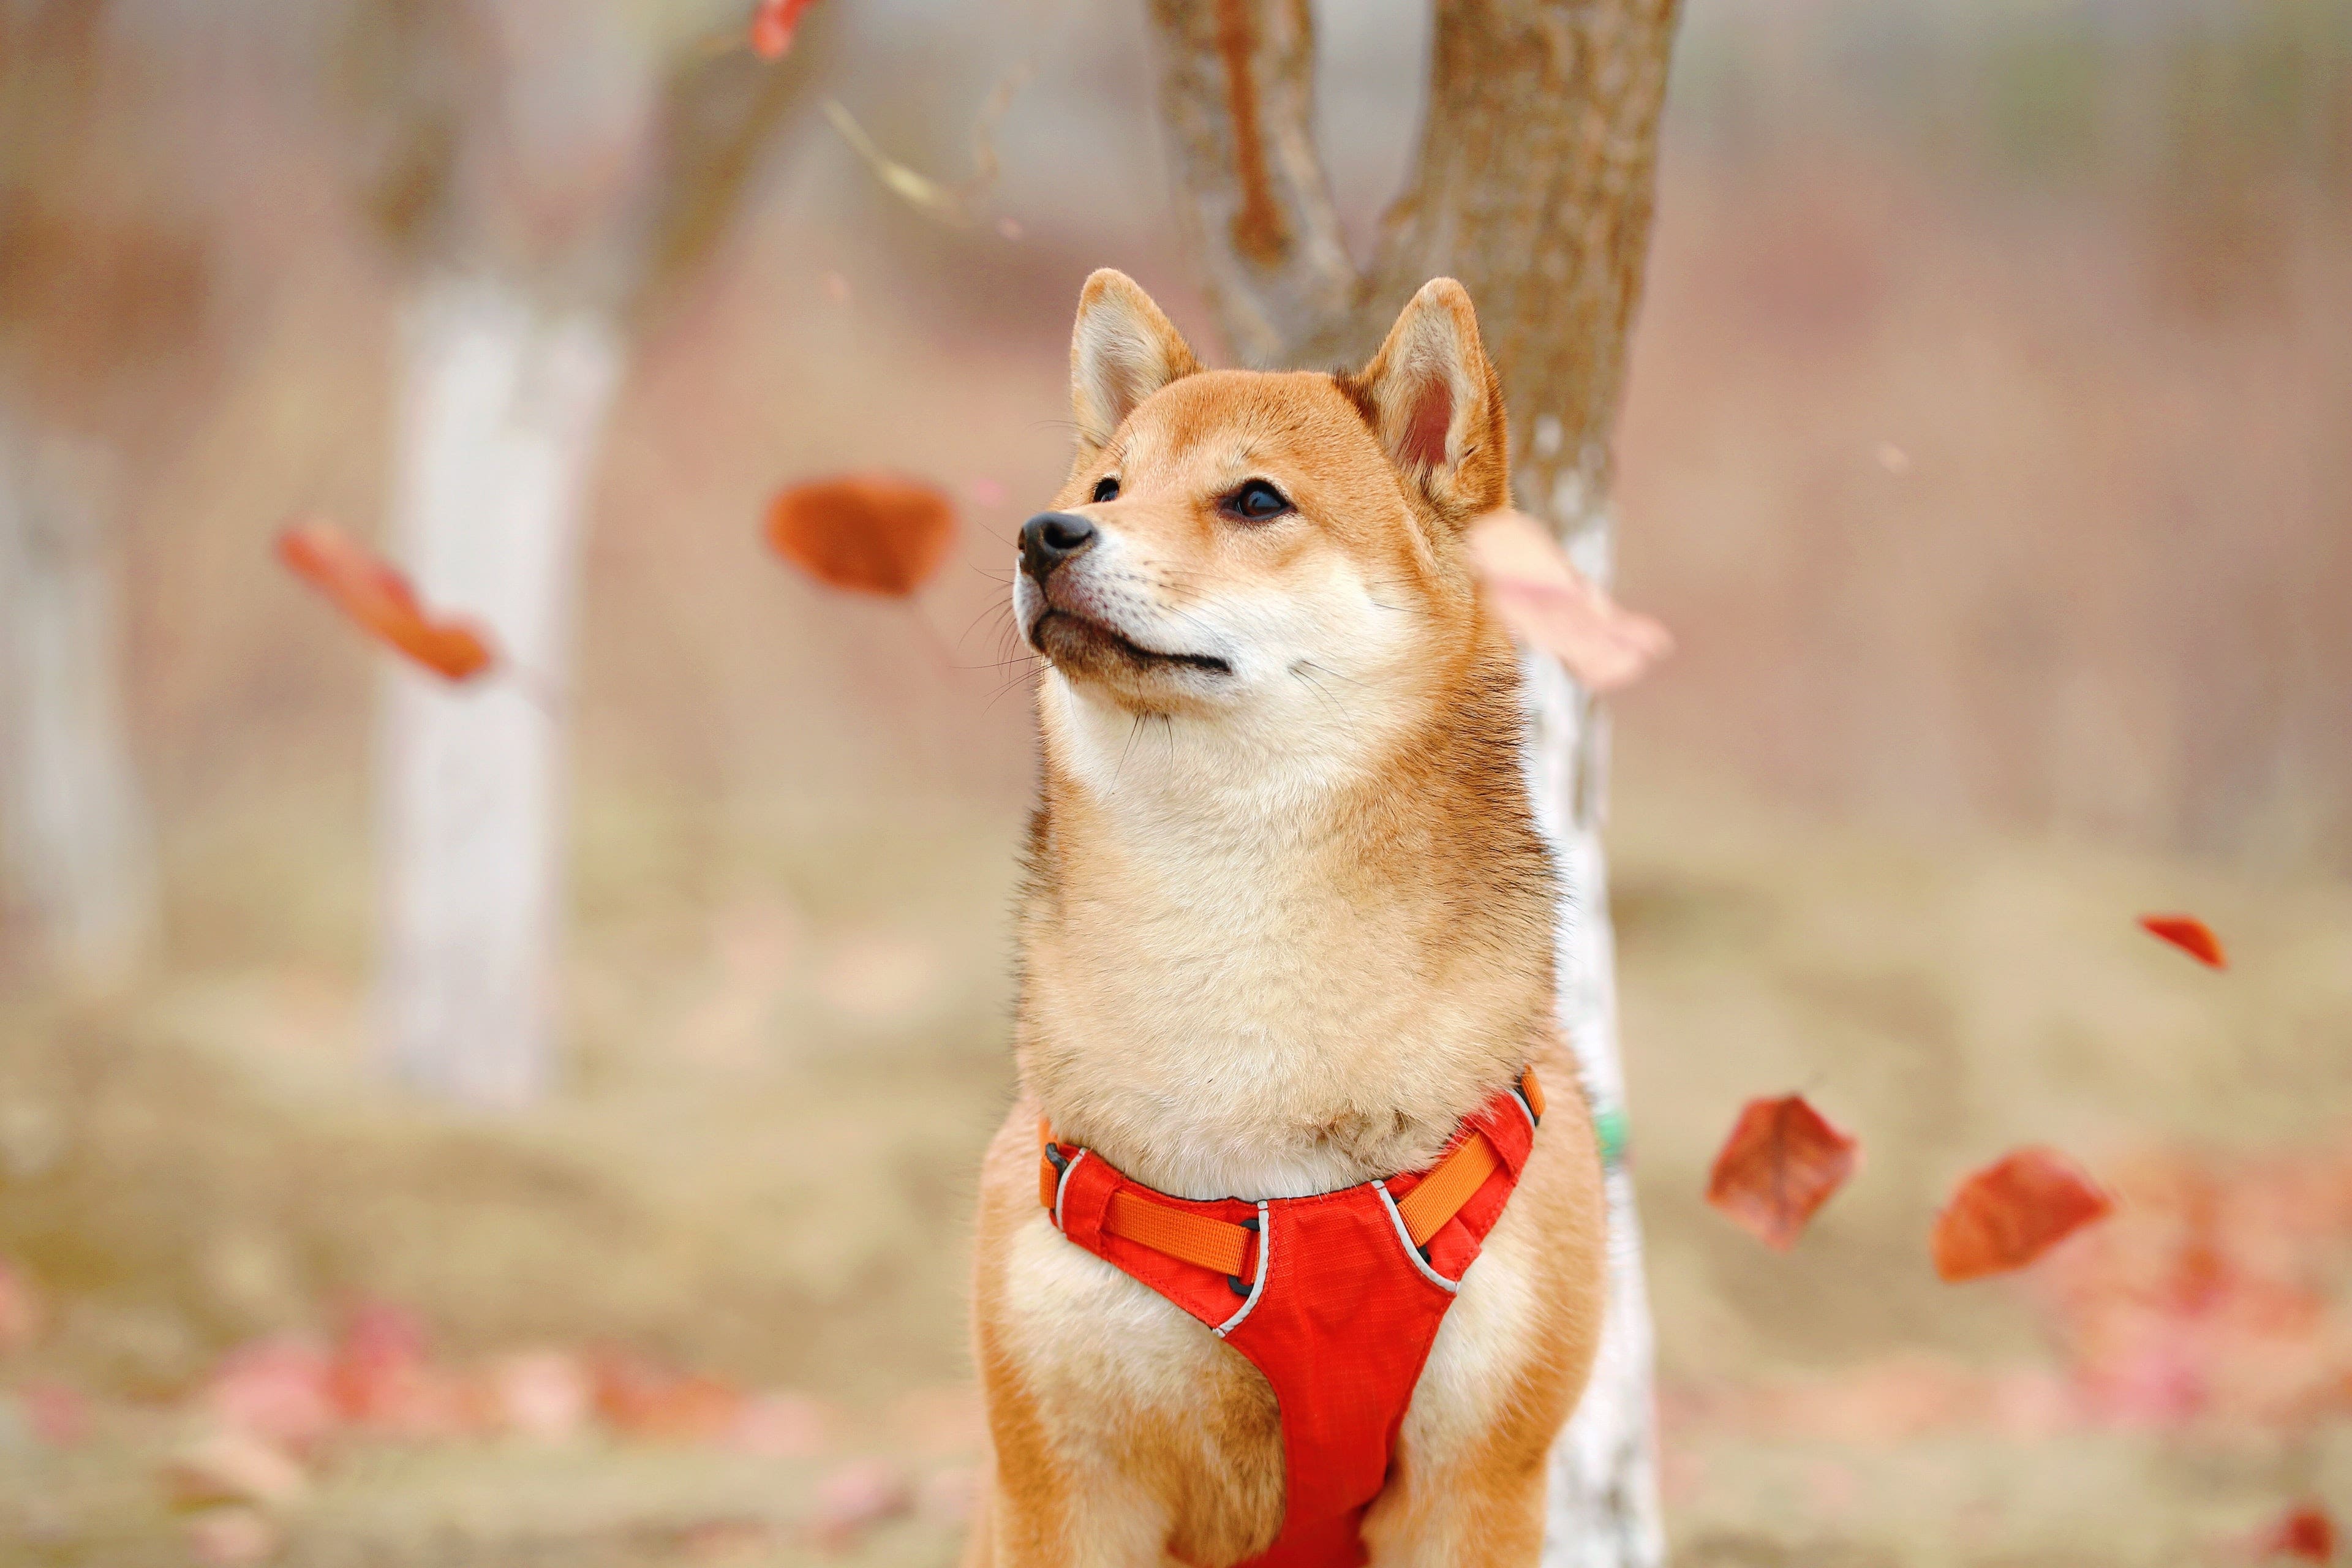 Dogecoin Rival Floki Inu Integrates Chainlink As It Branches Into DeFi